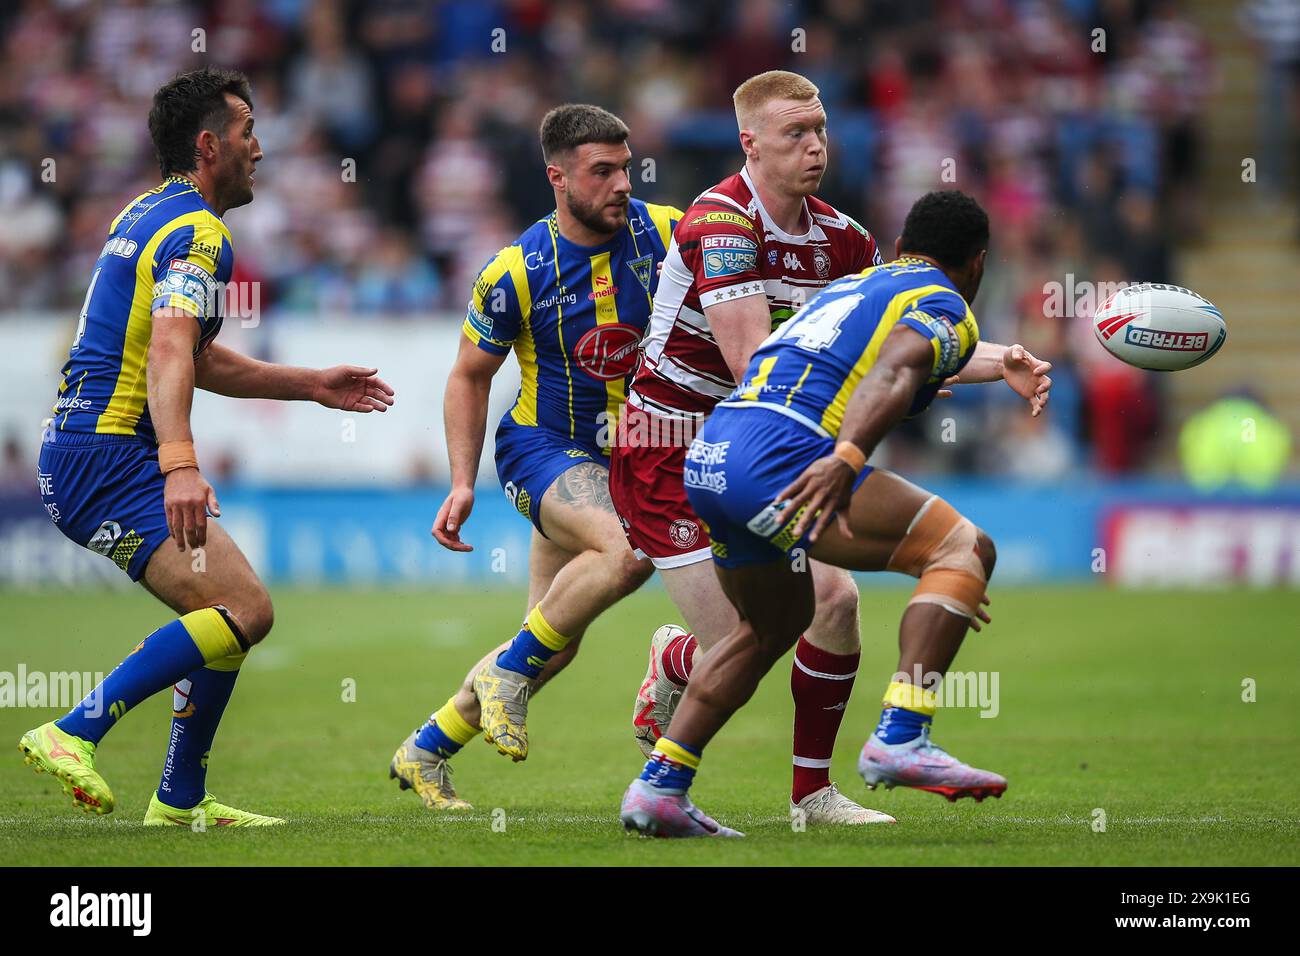 Zach Eckersley of Wigan Warriors passes the ball during the Betfred Super League Round 13 match Warrington Wolves vs Wigan Warriors at Halliwell Jones Stadium, Warrington, United Kingdom, 1st June 2024  (Photo by Gareth Evans/News Images) in Warrington, United Kingdom on 6/1/2024. (Photo by Gareth Evans/News Images/Sipa USA) Stock Photo